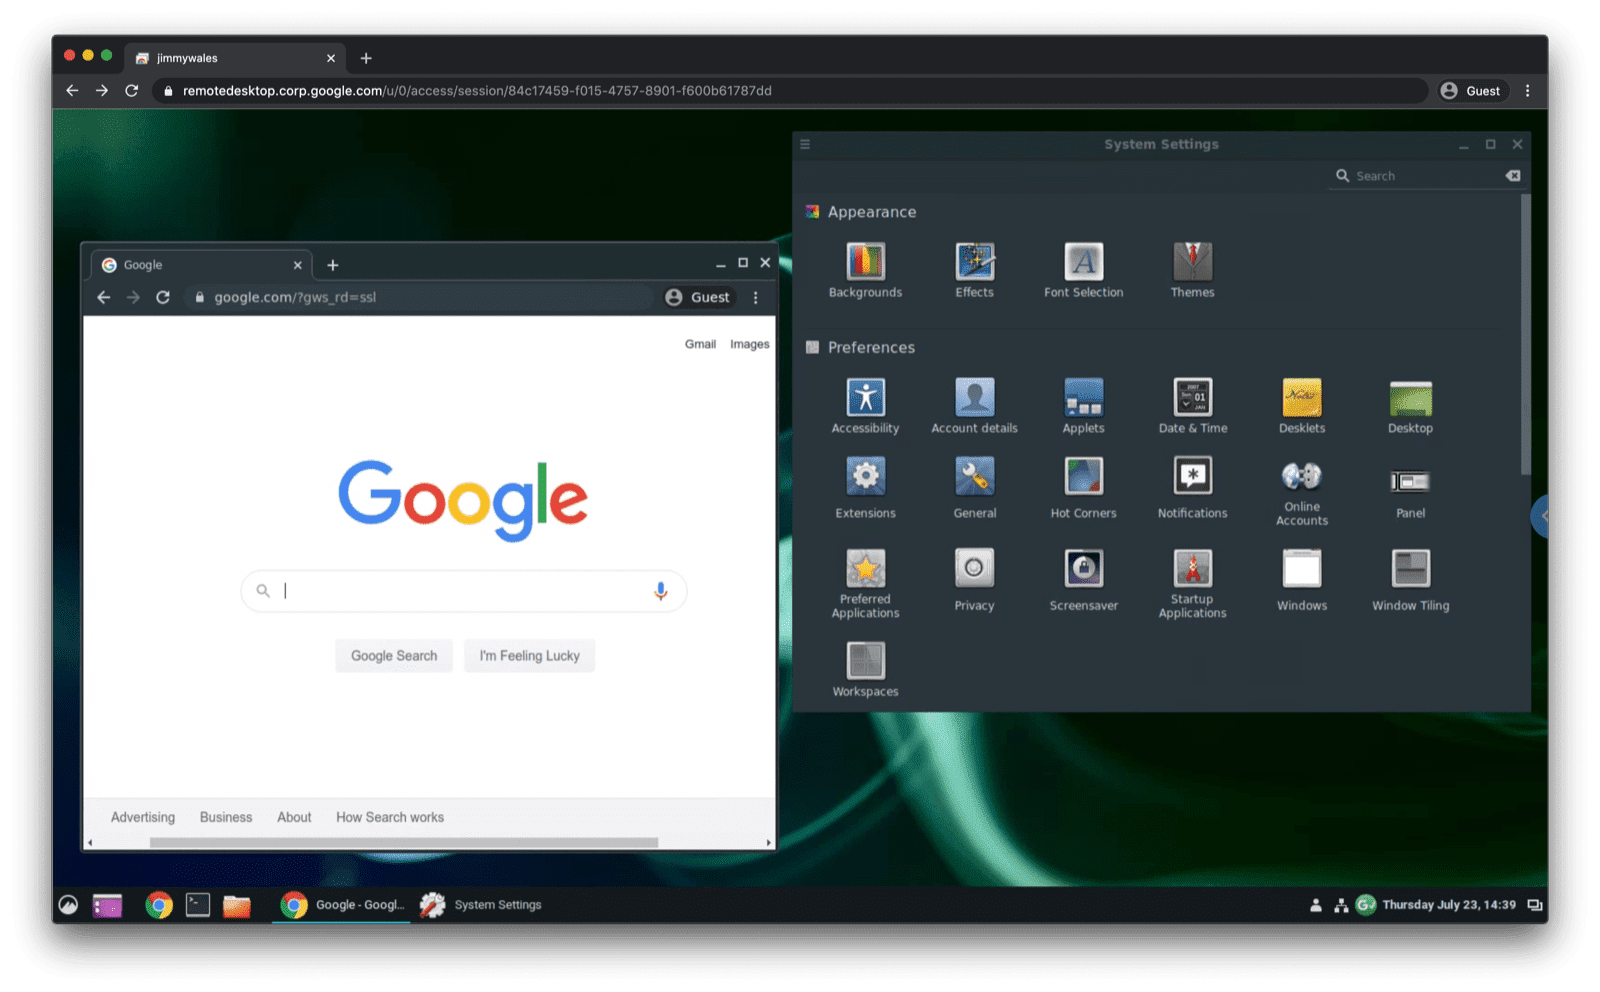 Ubuntu Linux streamed to a browser tab in macOS Chrome (not running in full screen mode yet).